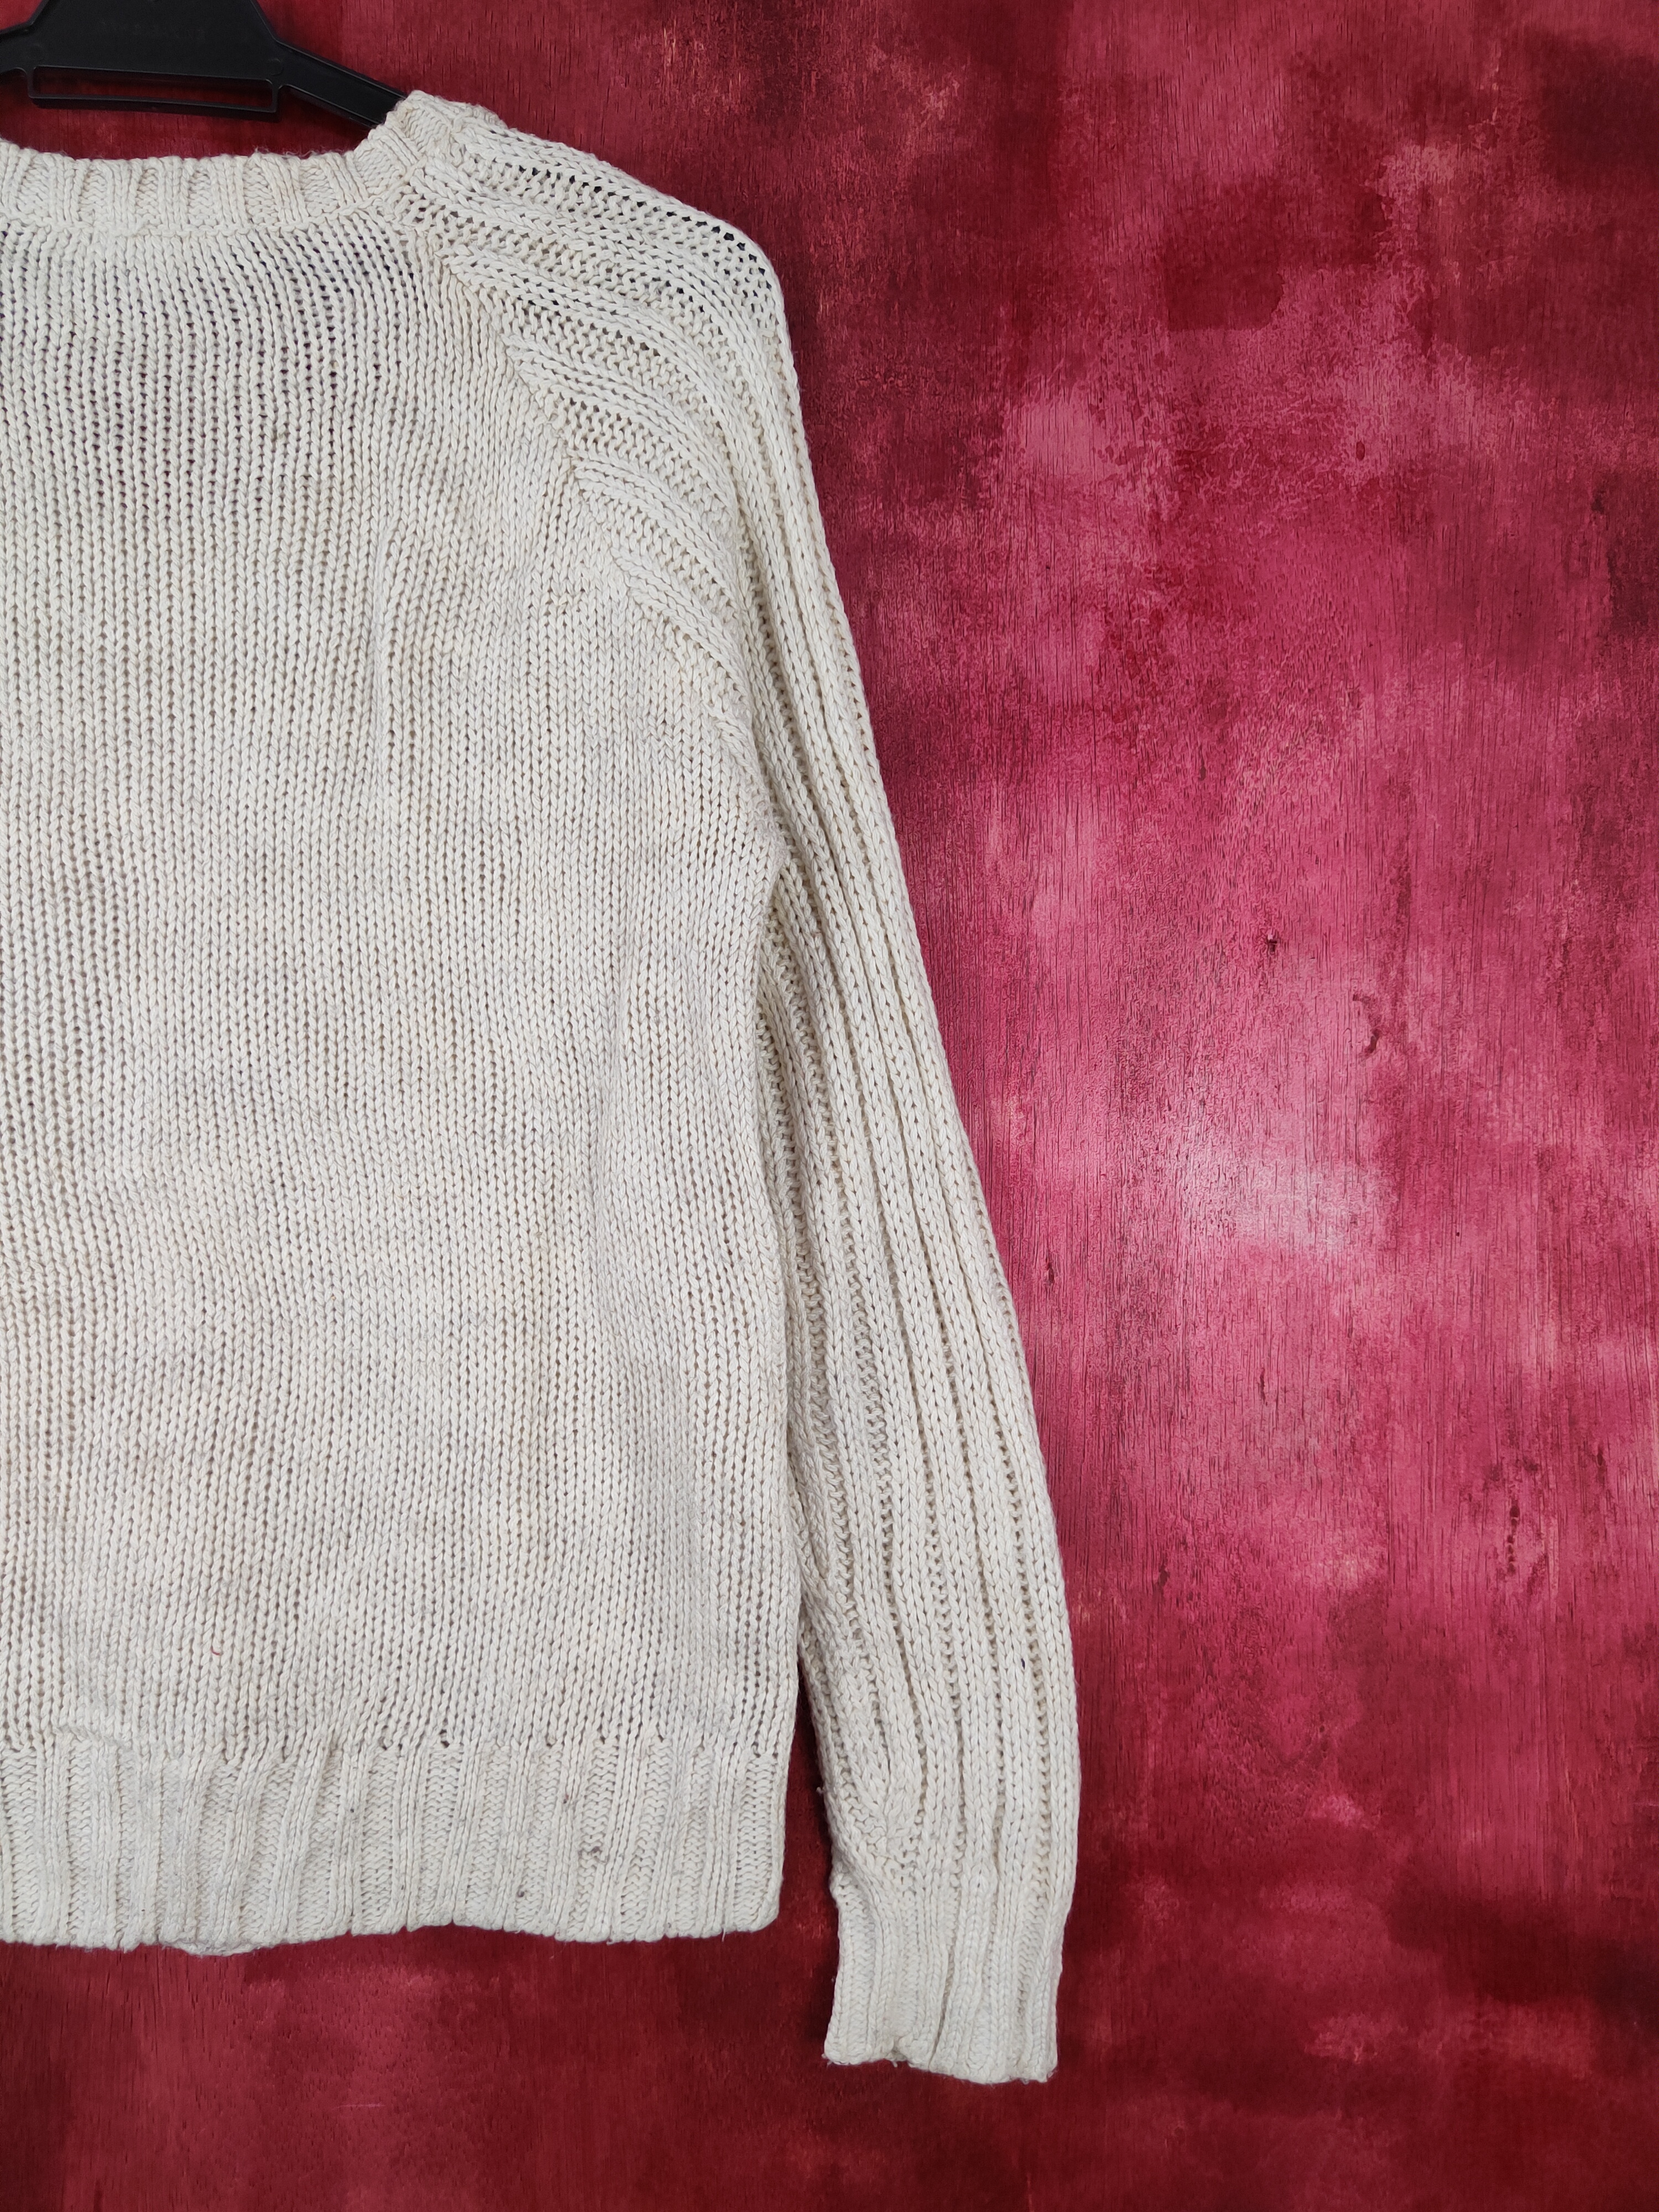 Japanese Brand - Archives White Knitwear Sweater Damage With Stain - 9